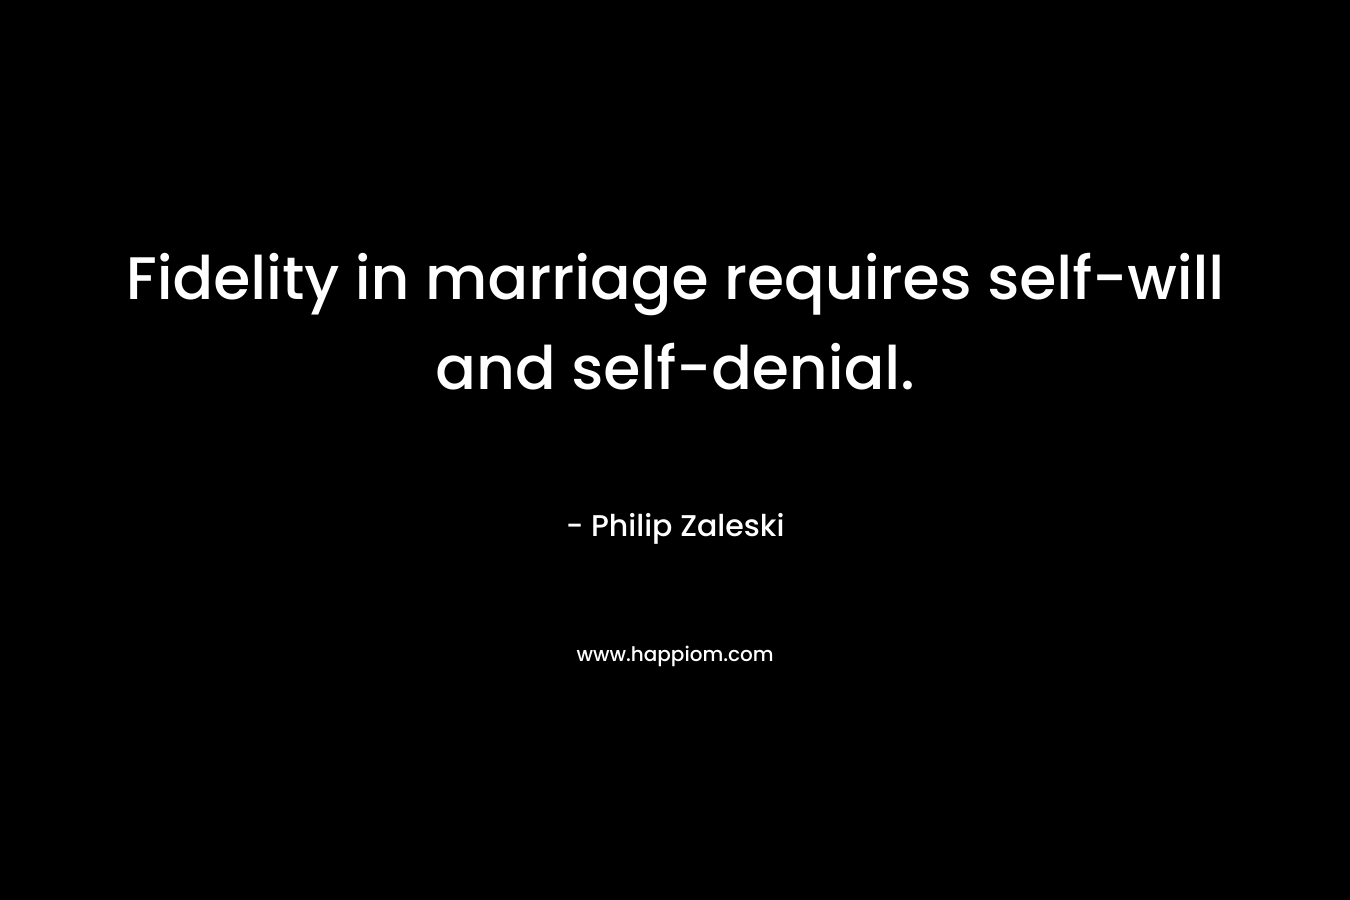 Fidelity in marriage requires self-will and self-denial. – Philip Zaleski